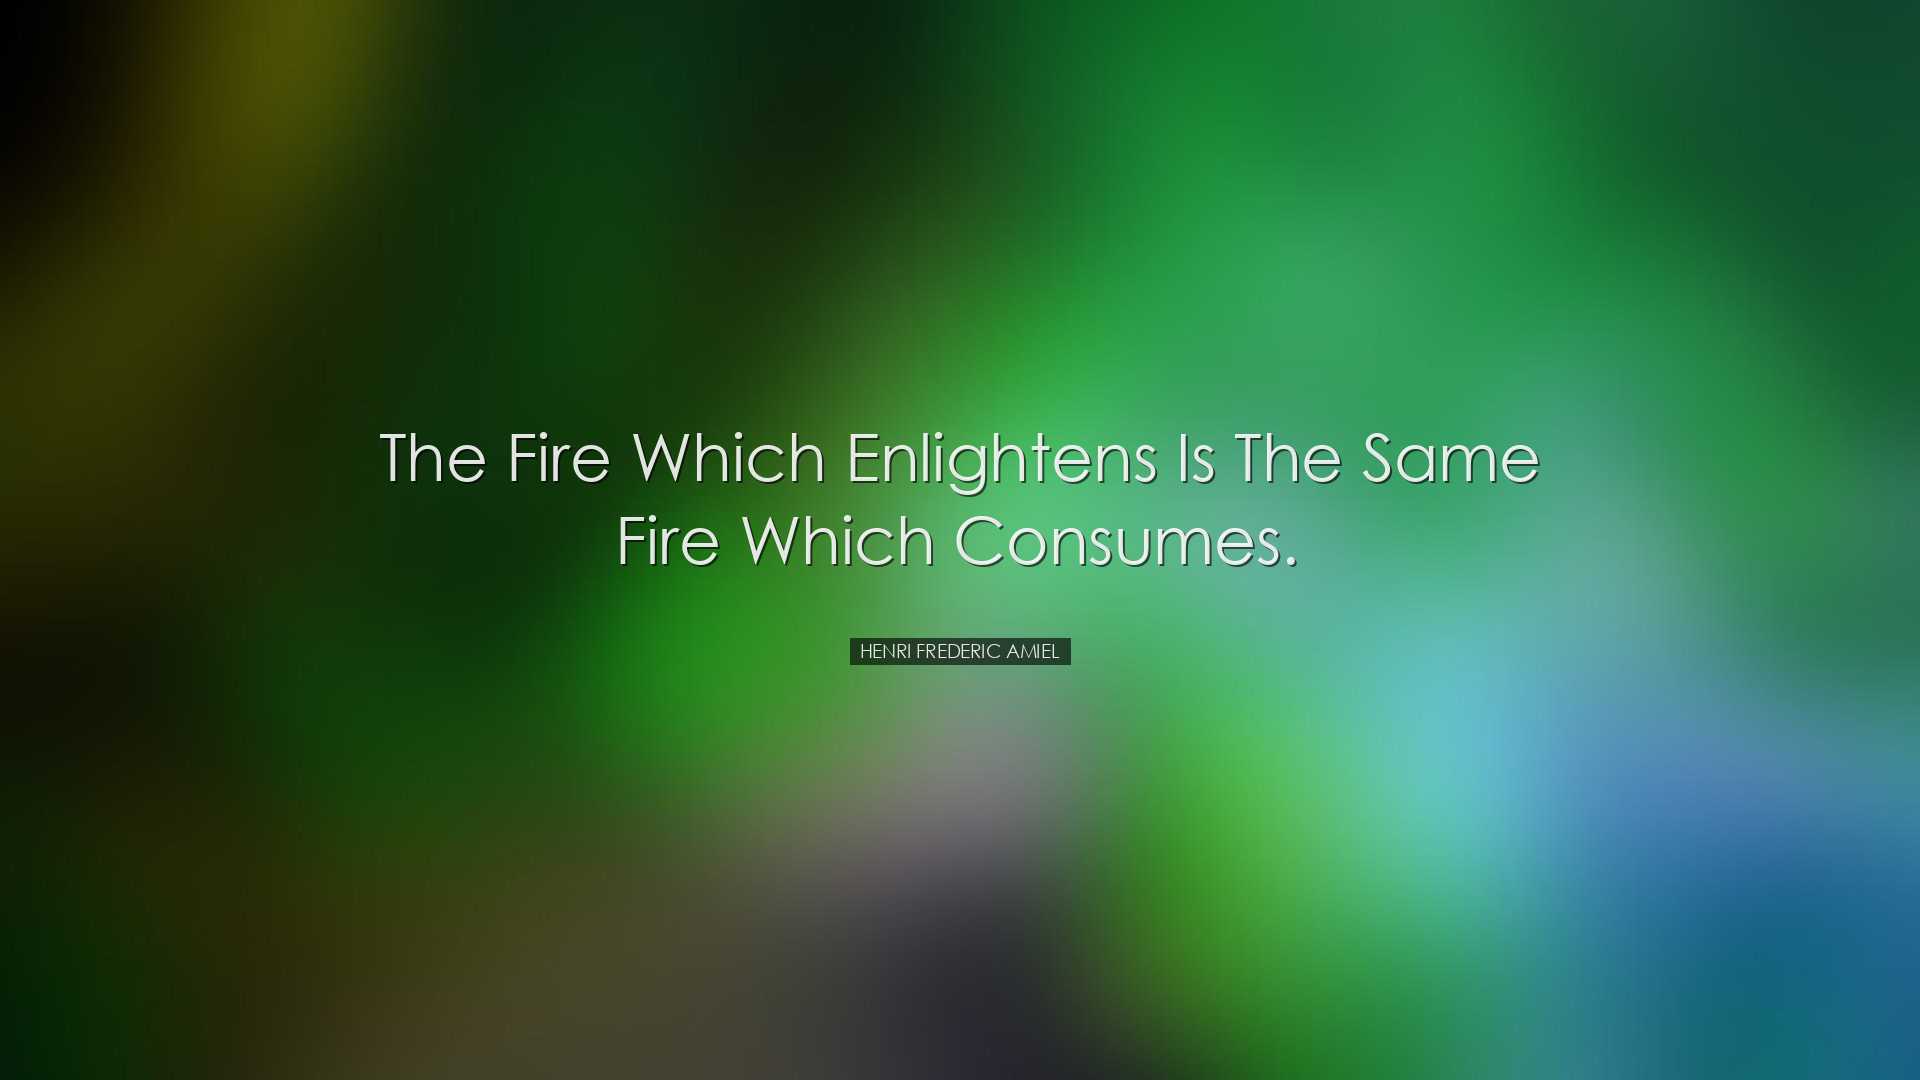 The fire which enlightens is the same fire which consumes. - Henri